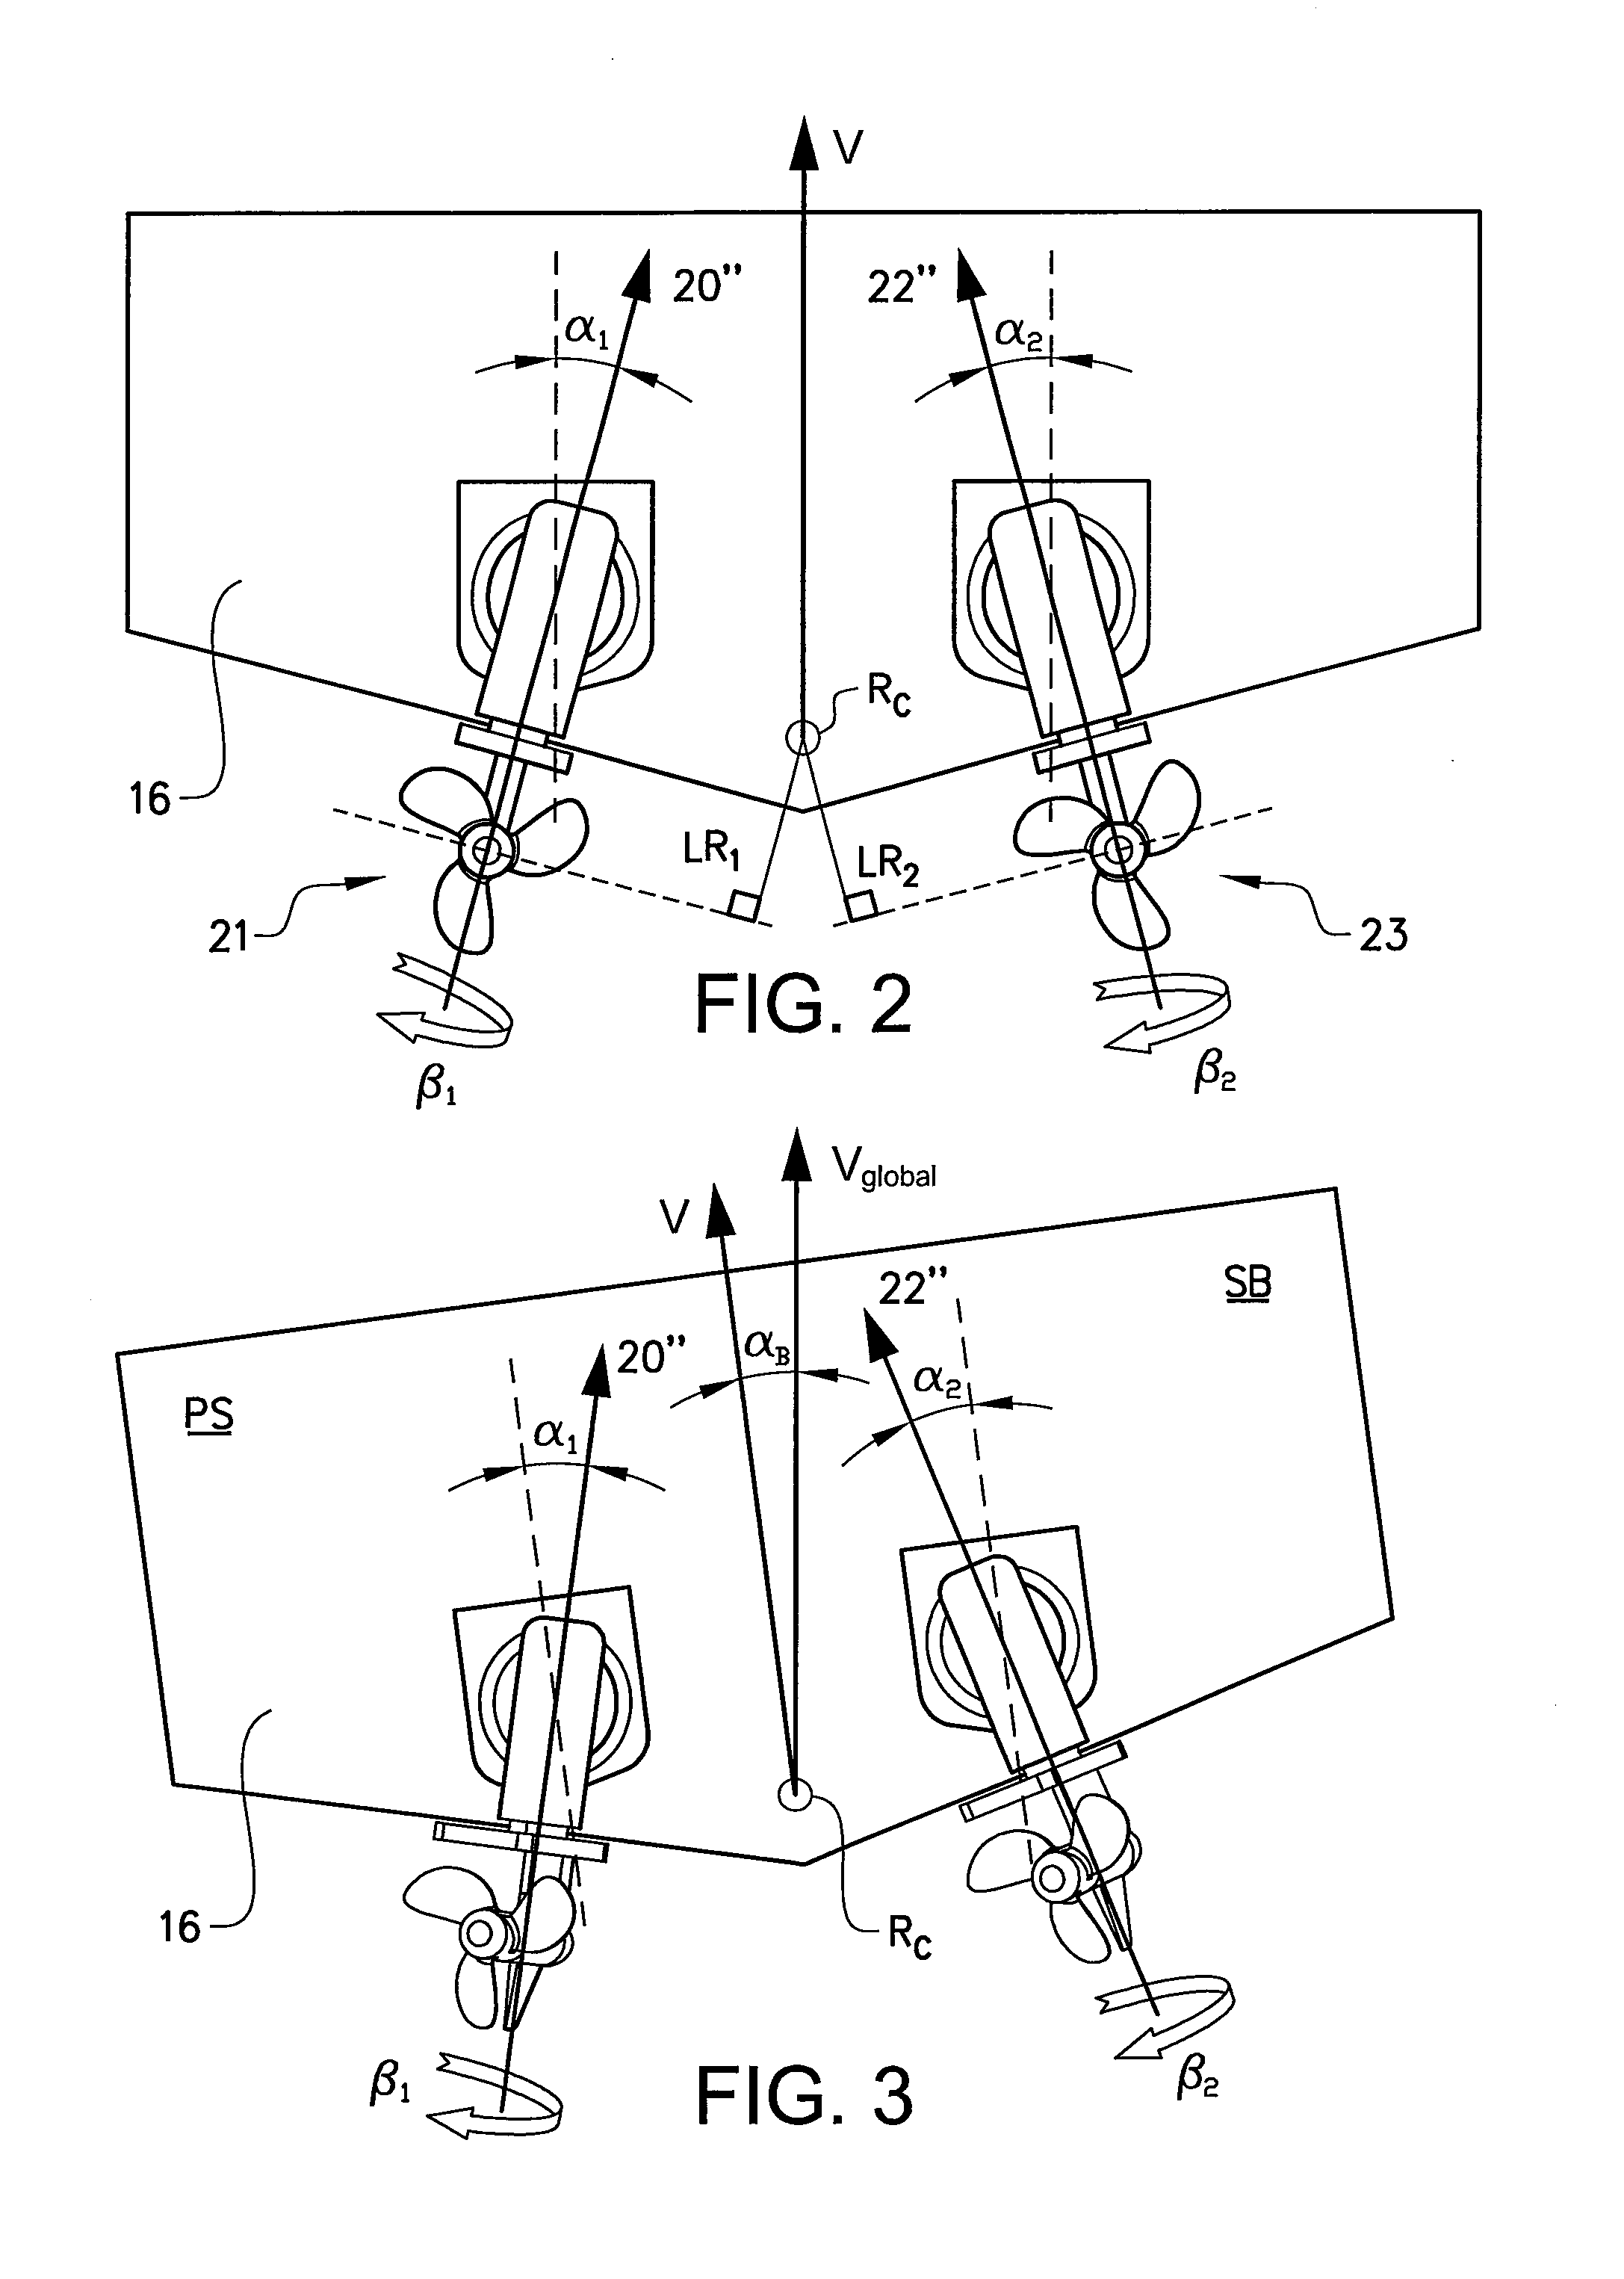 A method for controlling a boat comprising a pivotable drive unit, and a electronic vessel control unit for steering a boat